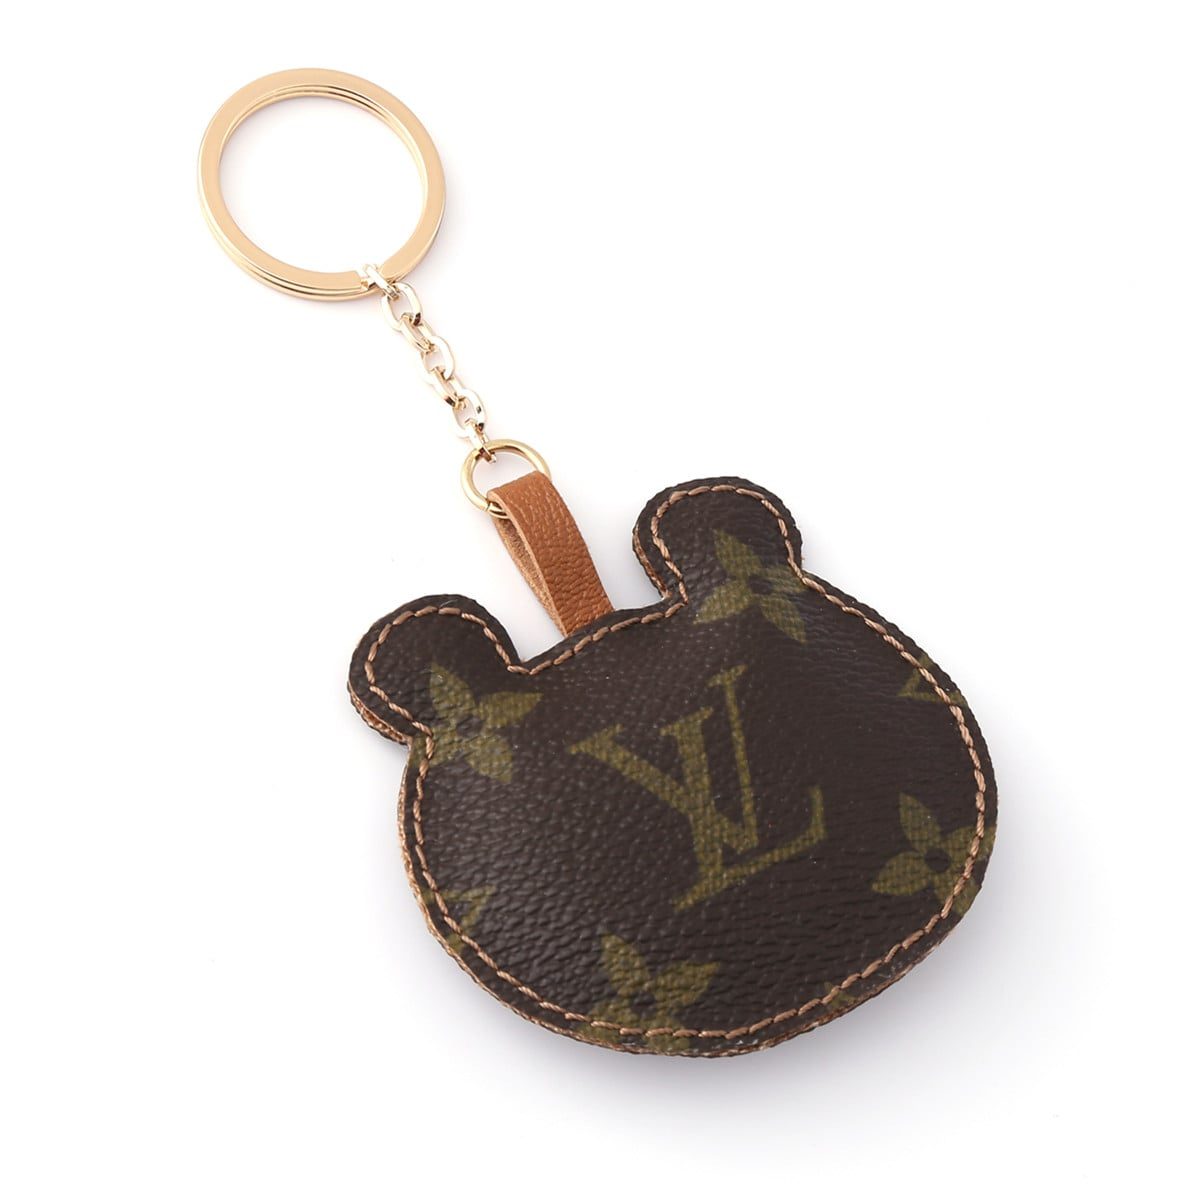 Upcycled Louis Vuitton Brown Bear Keychain - LingSense